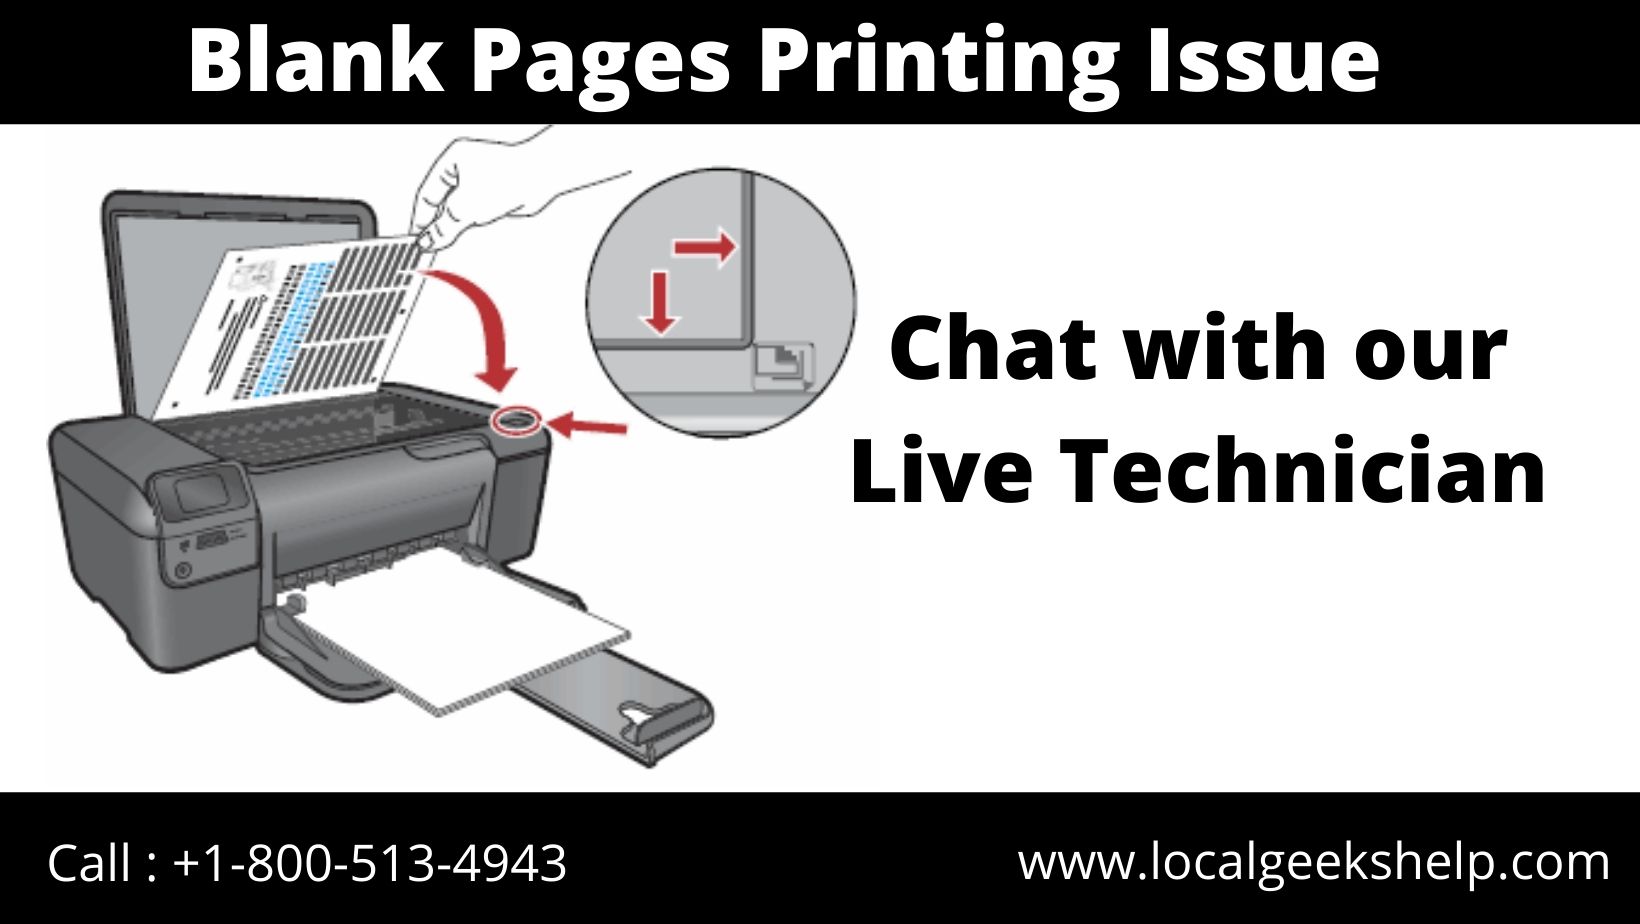 Blank Pages Printing Issue